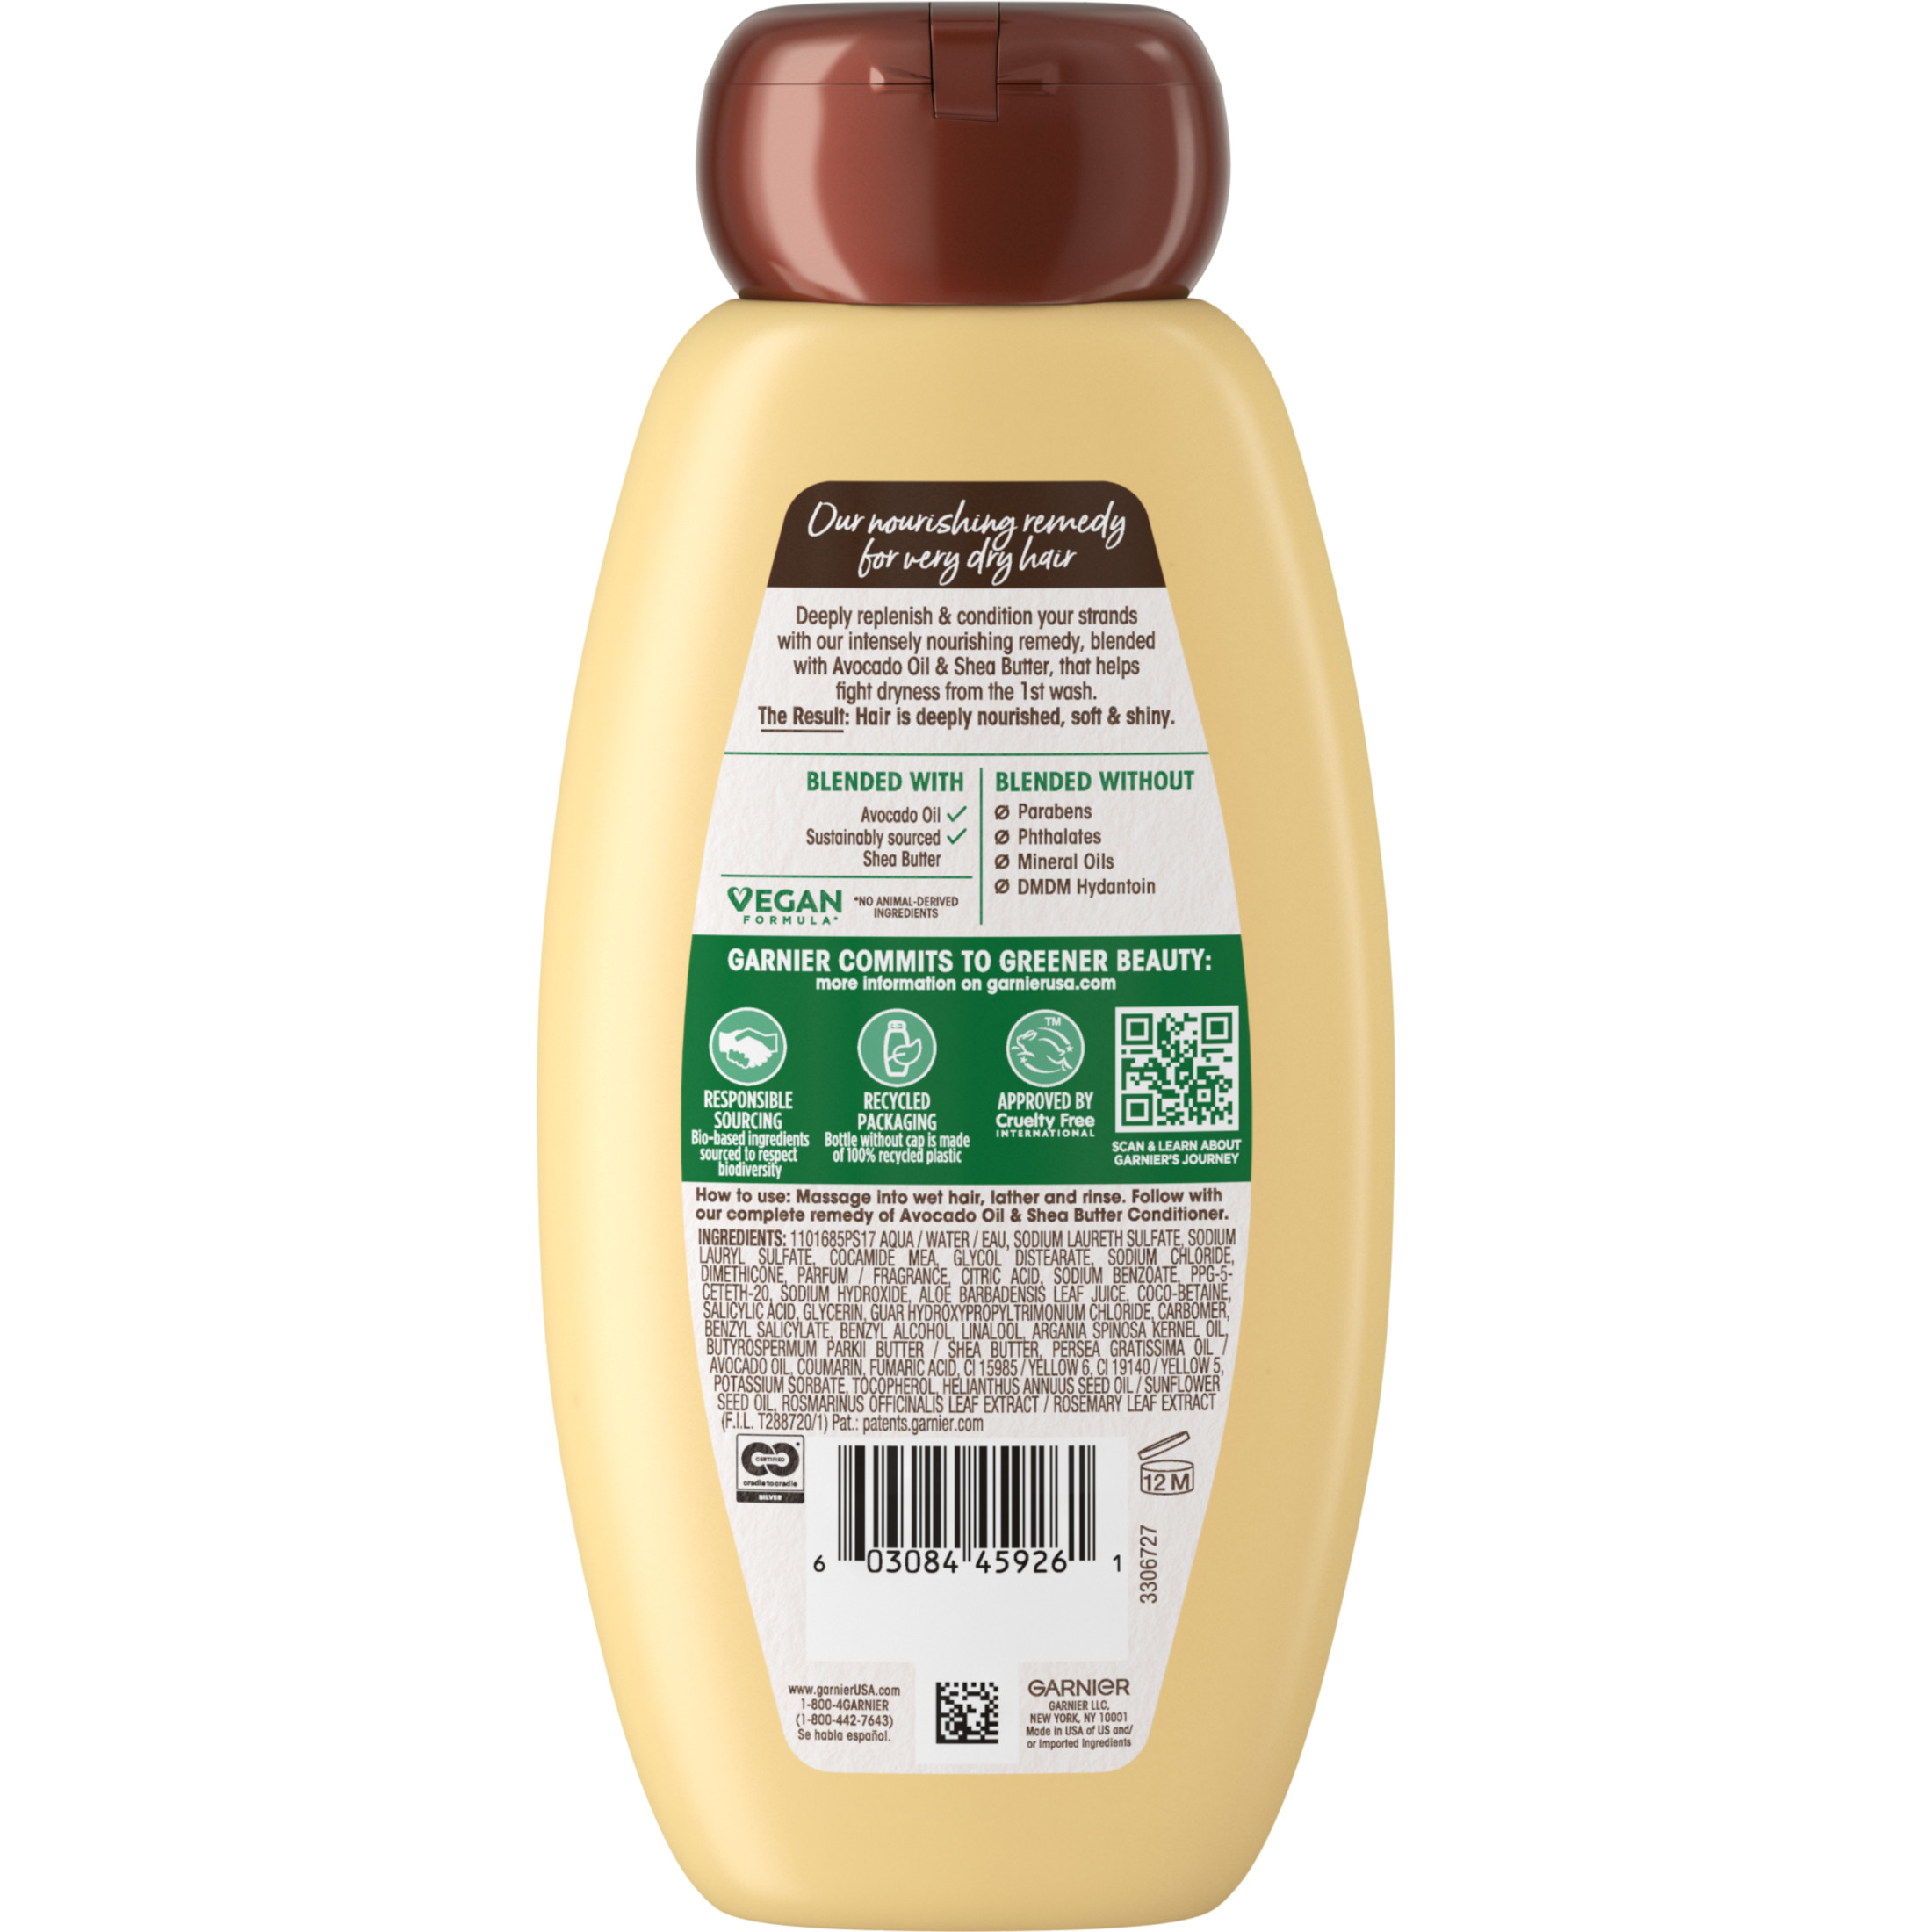 Garnier Whole Blends Nourishing Shampoo with Avocado Oil and Shea Butter, 12.5 fl oz - image 2 of 8